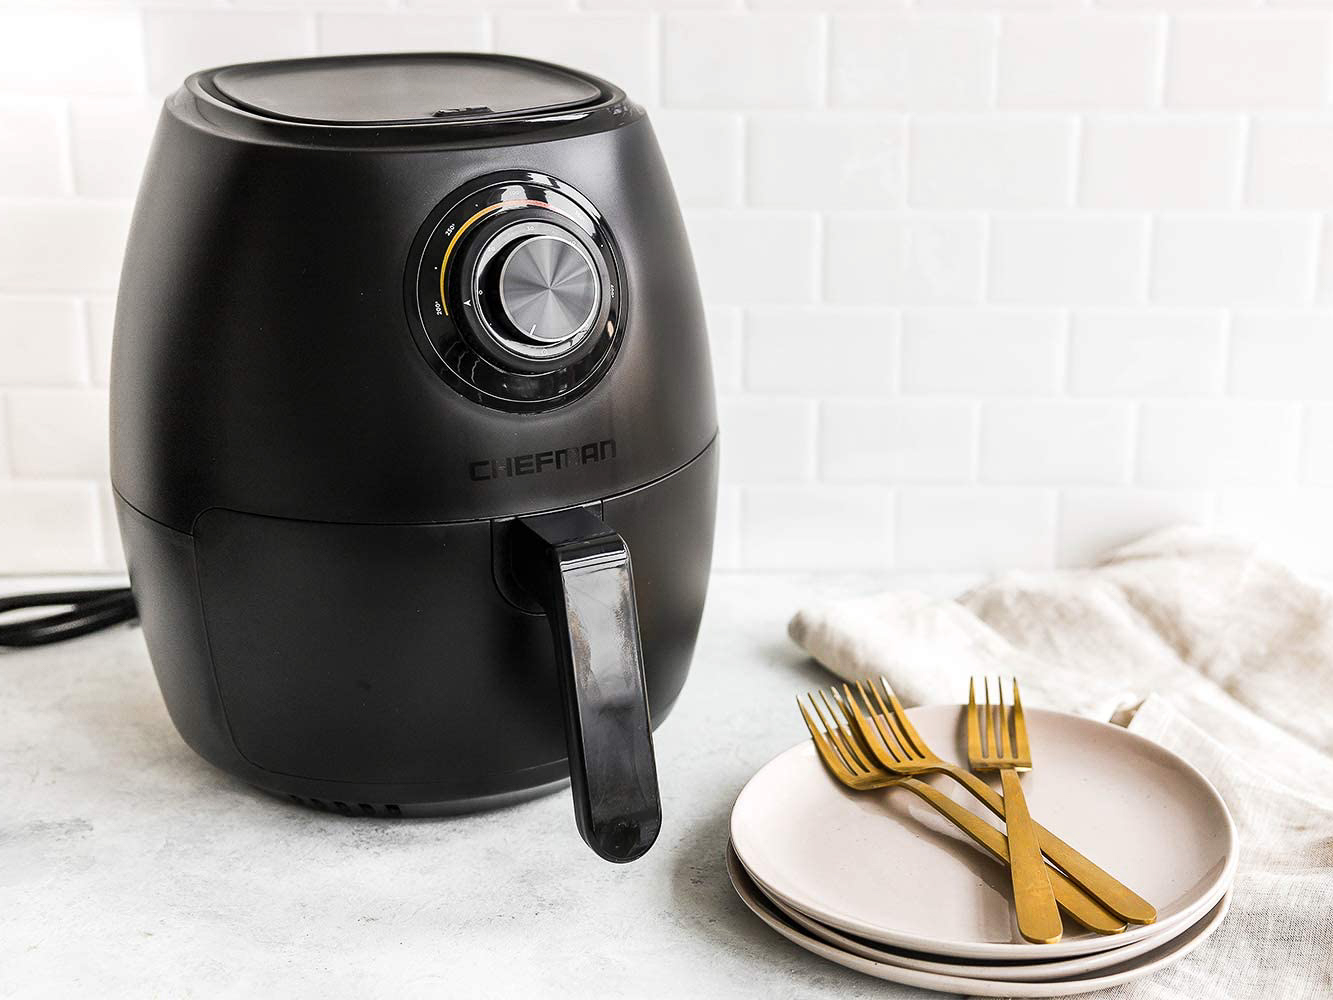 Chefman's regularly $90 stainless steel TurboFry 5-qt. air fryer